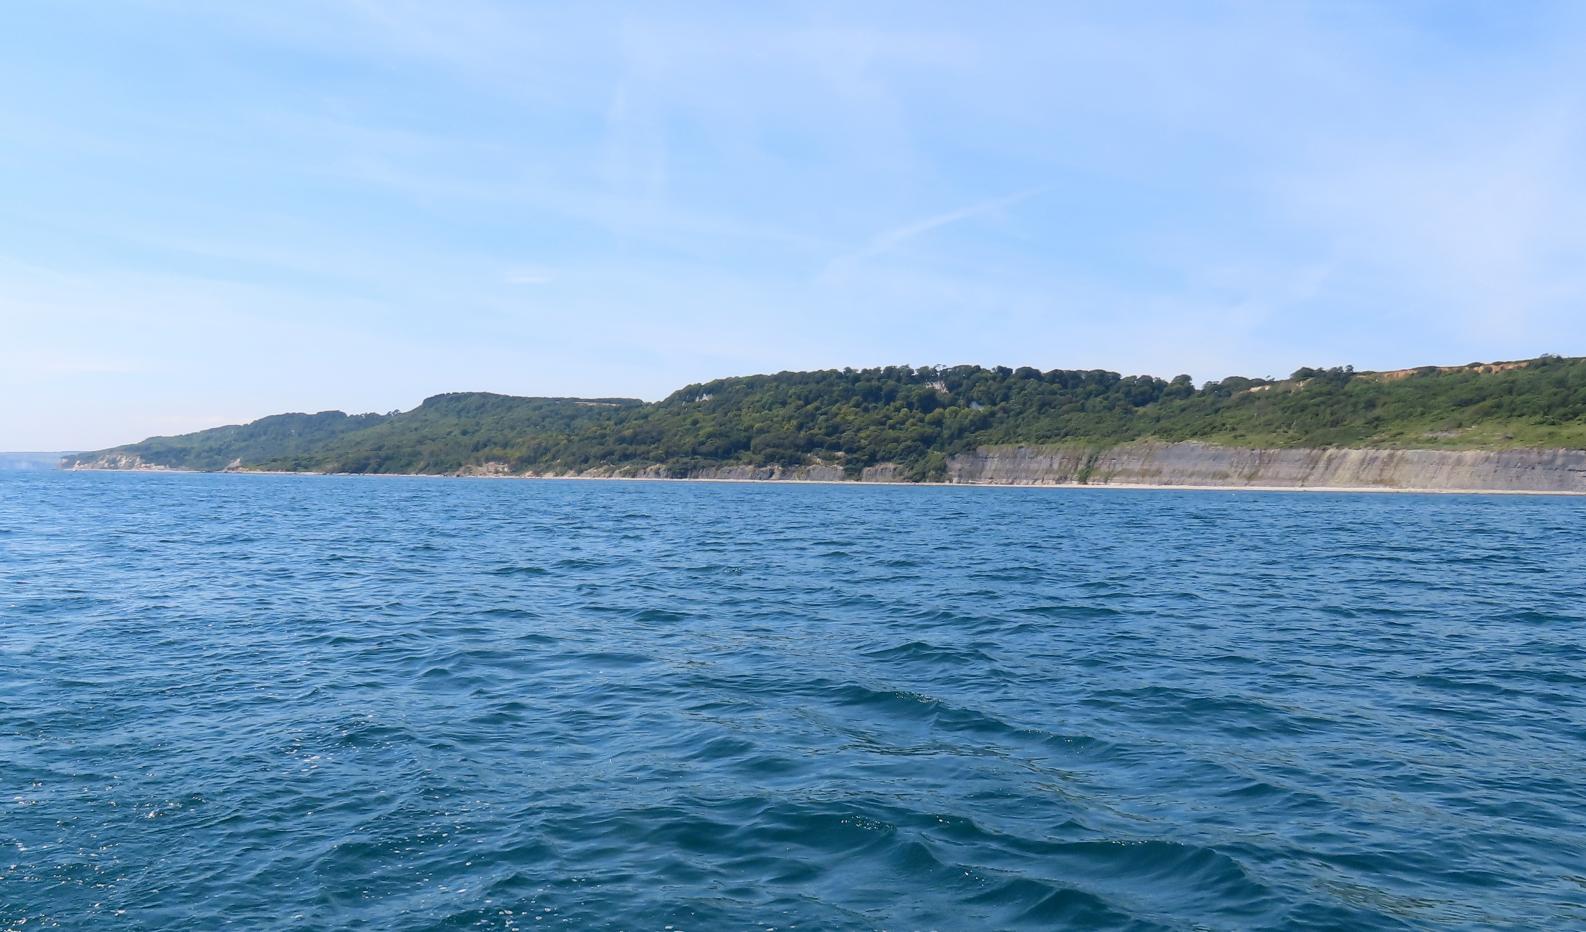 Lyme Regis undercliff viewed from the sea